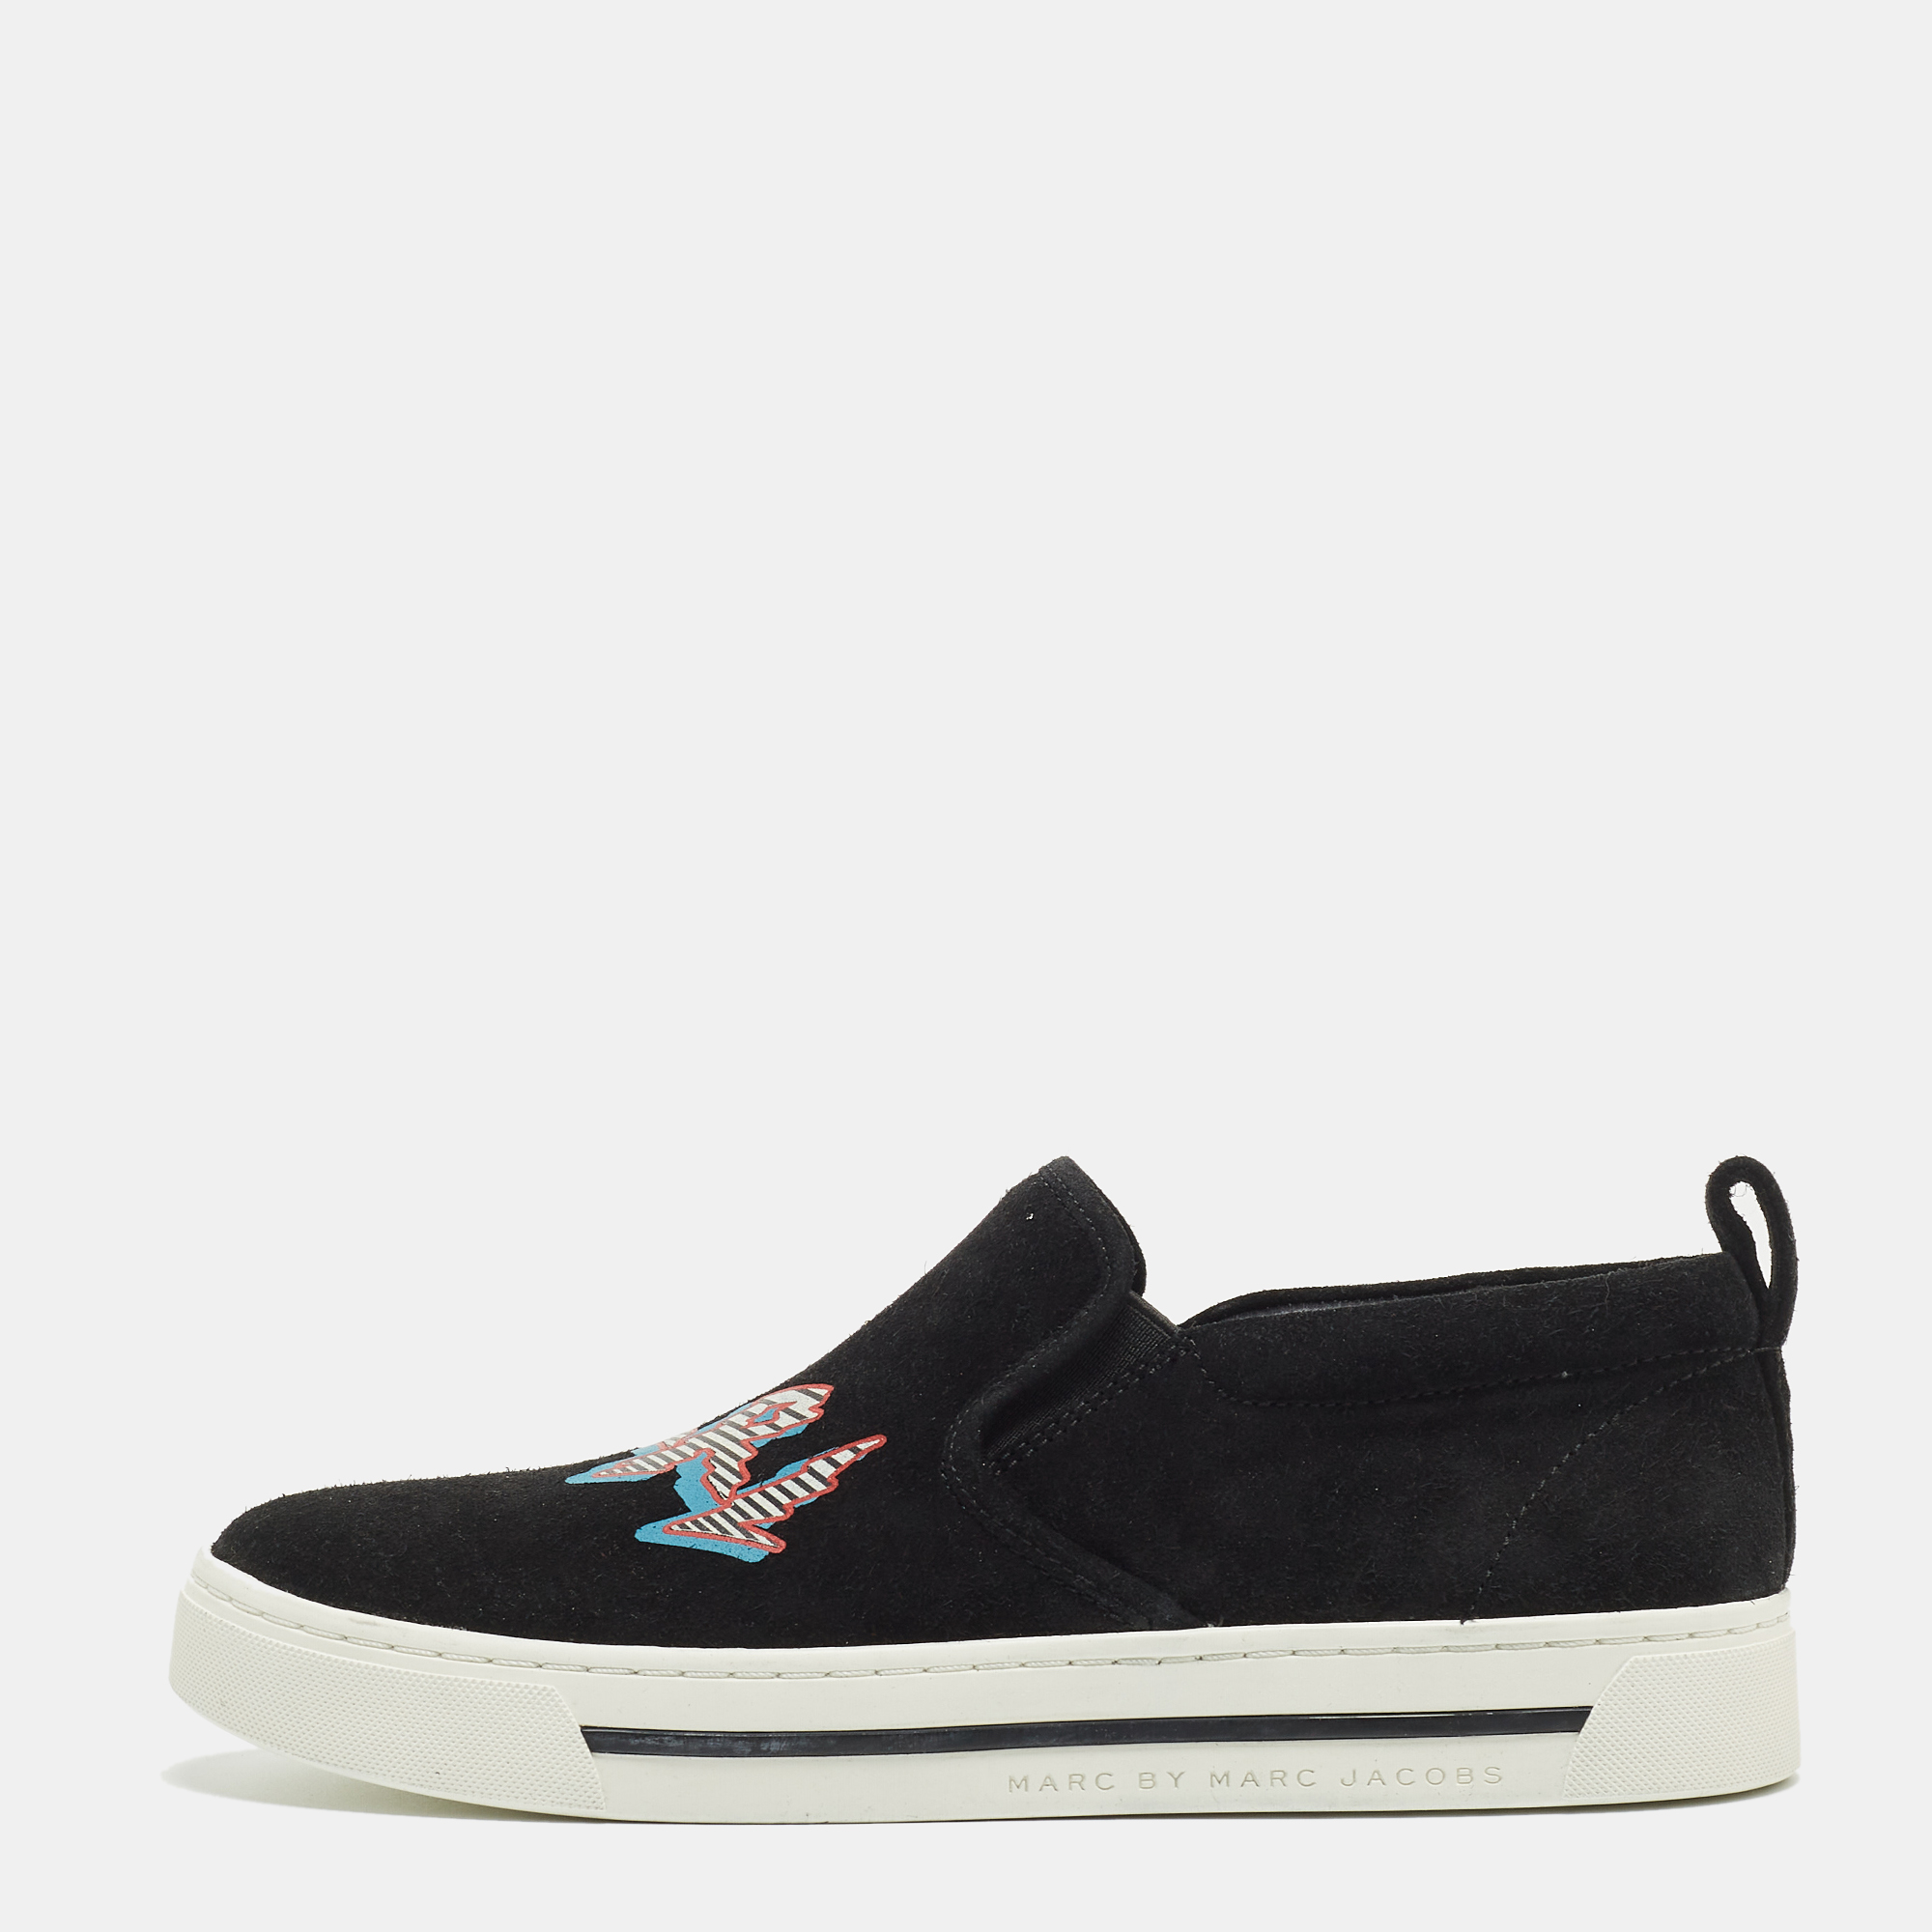 Pre-owned Marc By Marc Jacobs Black Suede Grrl Slip On Sneakers Size 37